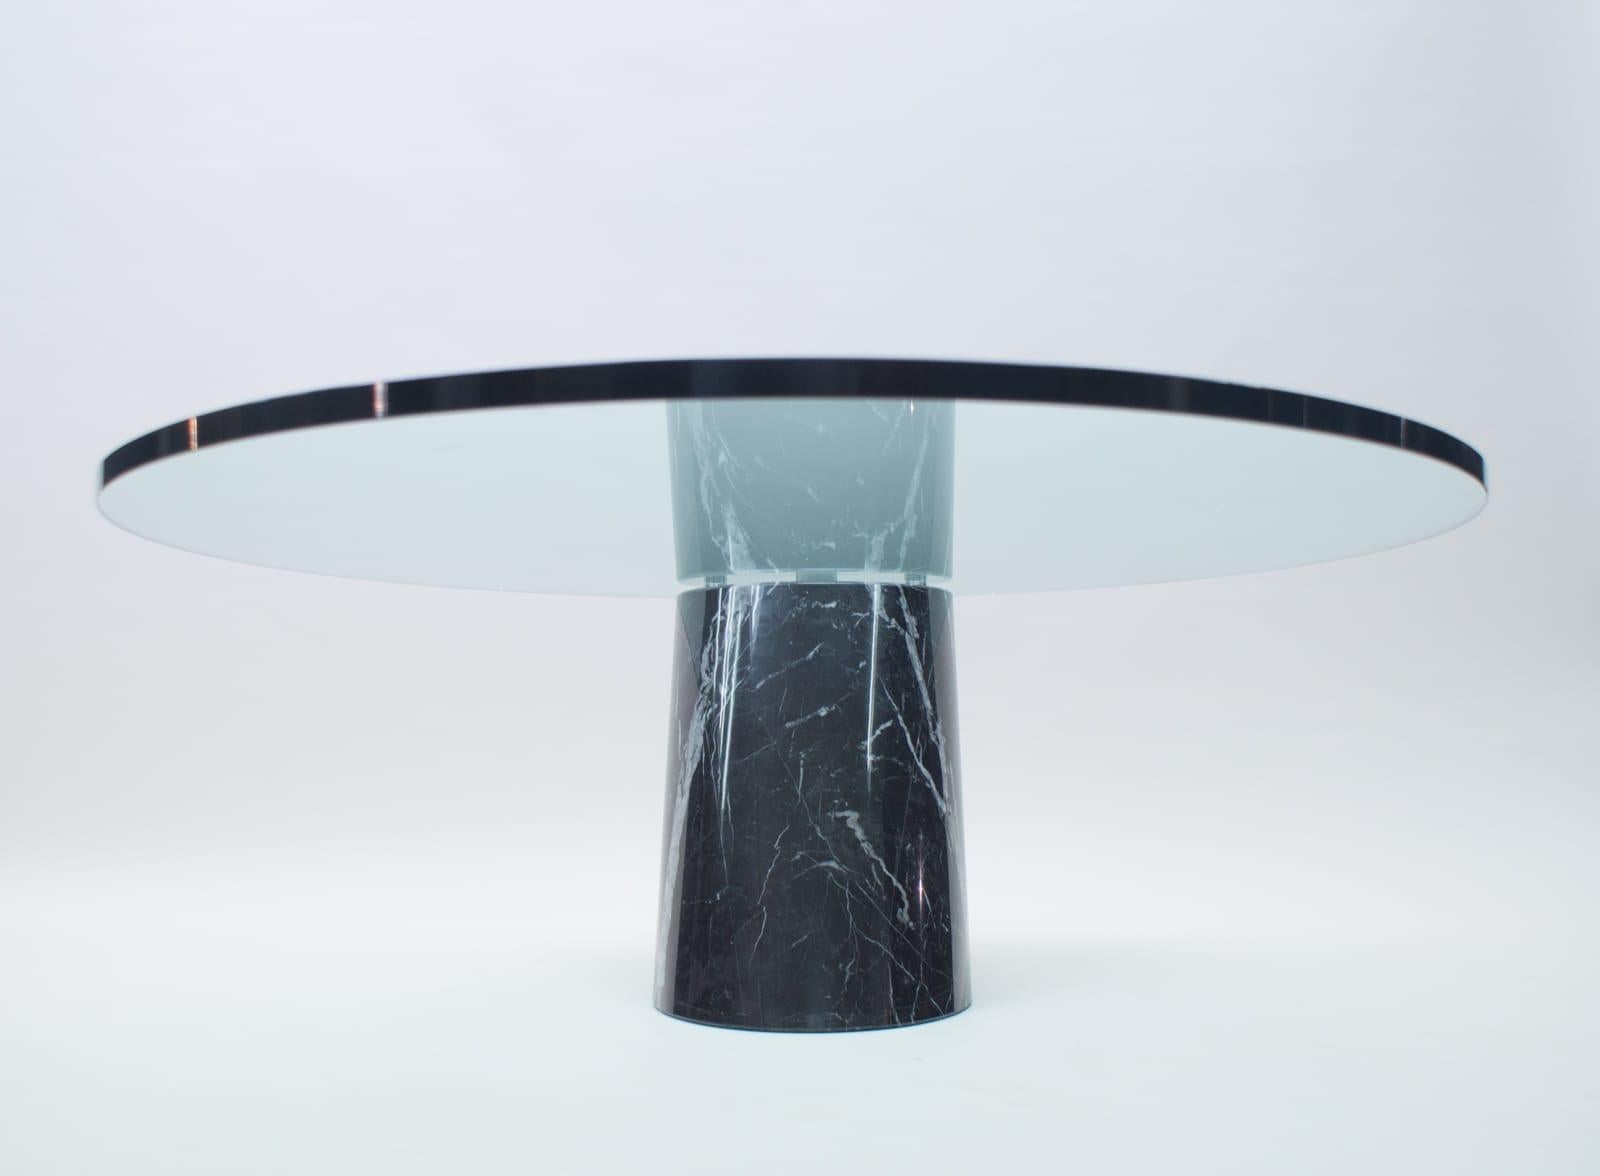 Late 20th Century Black Marble and Glass Coffee Table Model K1000 by Team Form for Ronald Schmitt